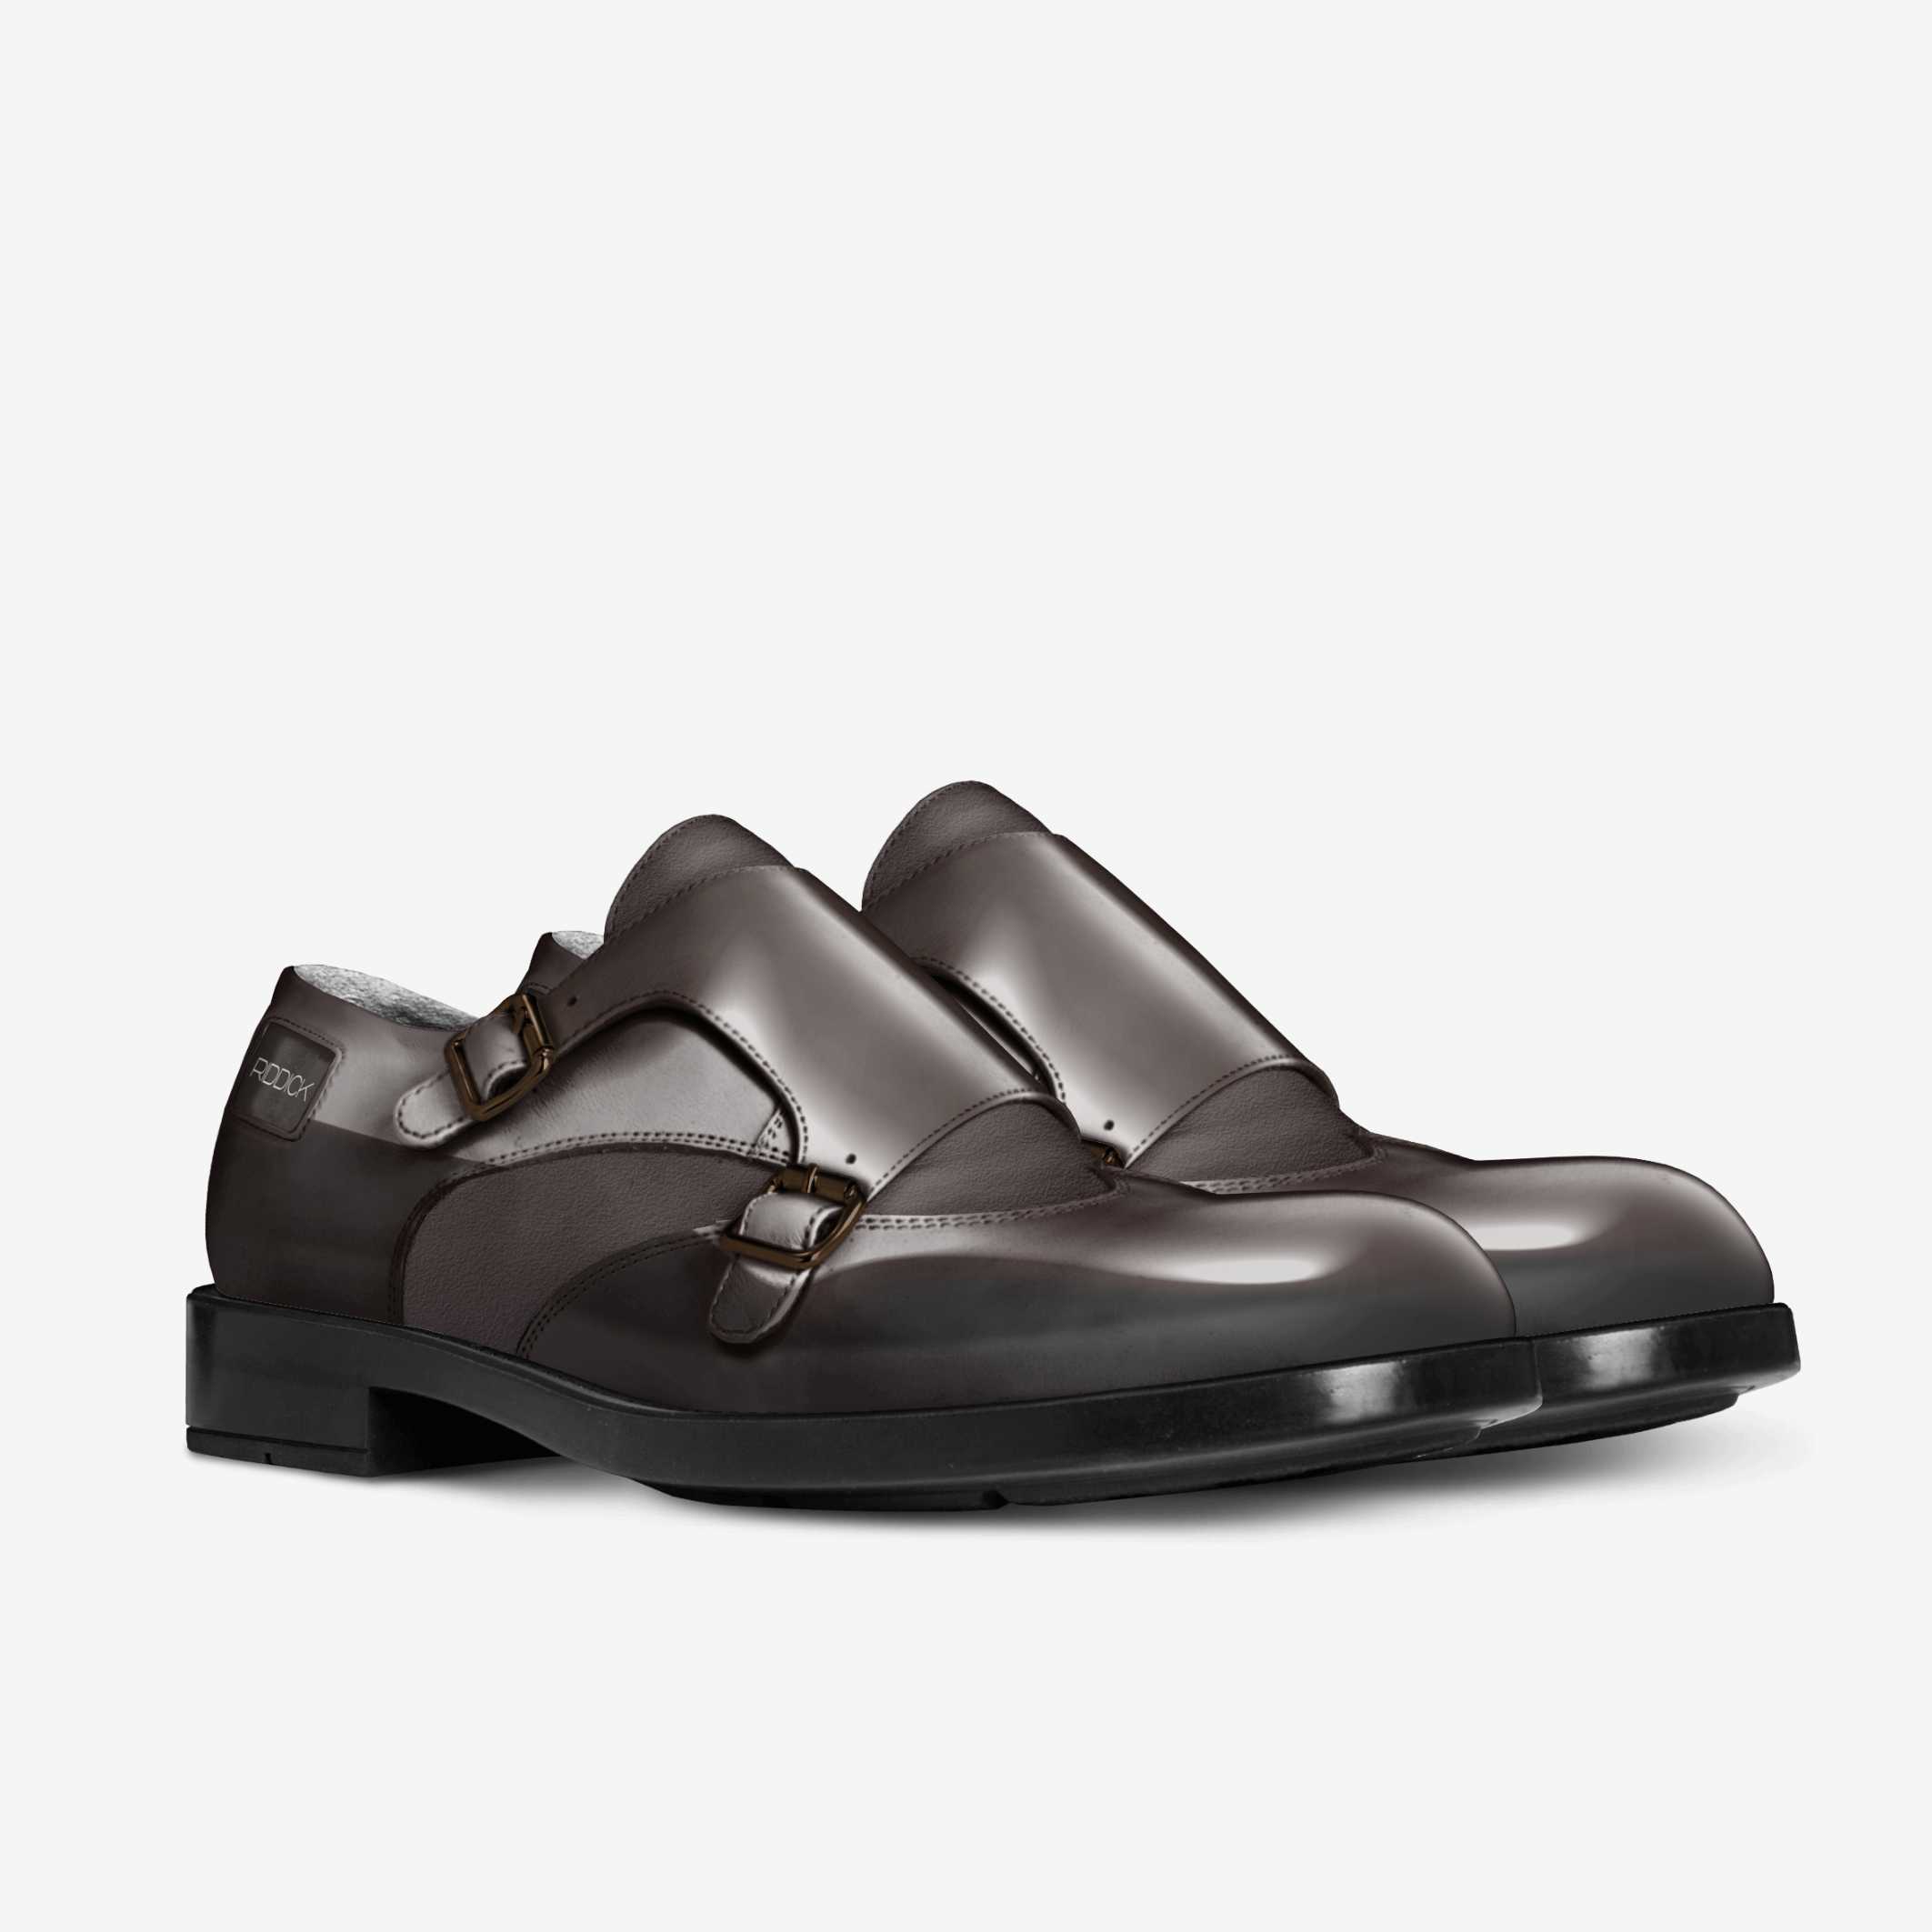 EXEC, STRAPPED (IN TOBACCO) - Riddick Shoes Shoe Riddick Shoes   